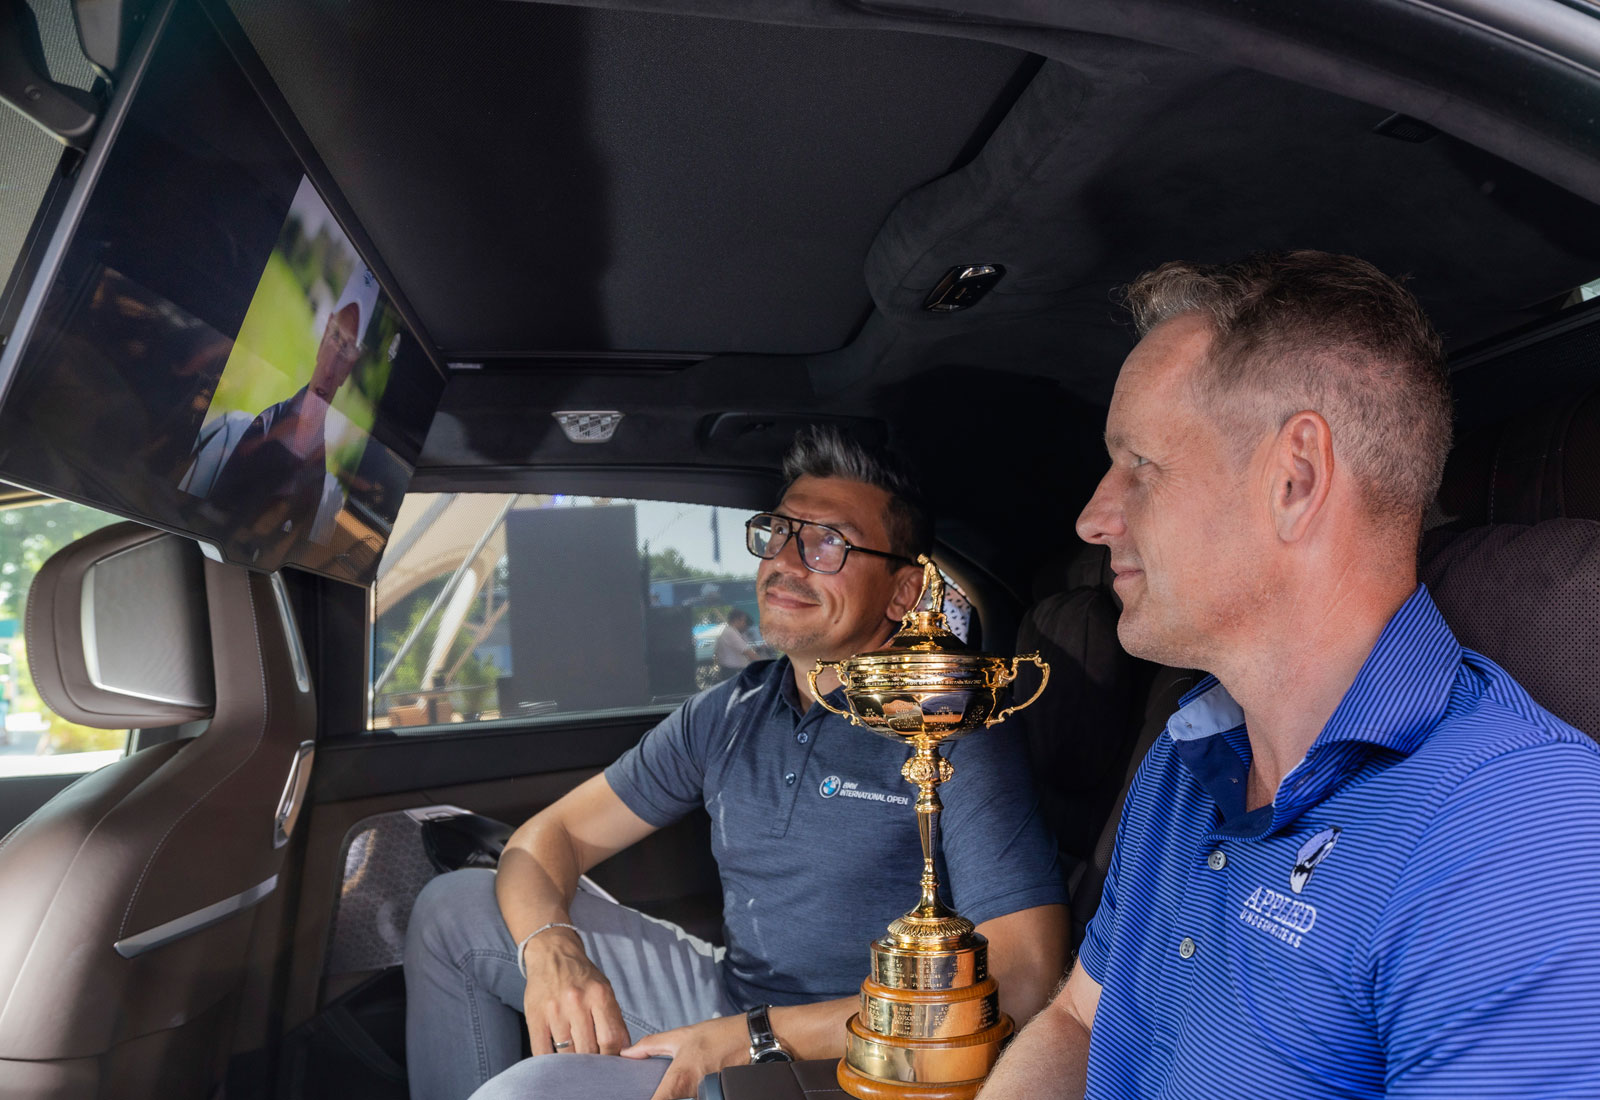 BMW Unveils Ryder Cup Broadcasts to BMW 7 Series for Exclusive In-Car Experience